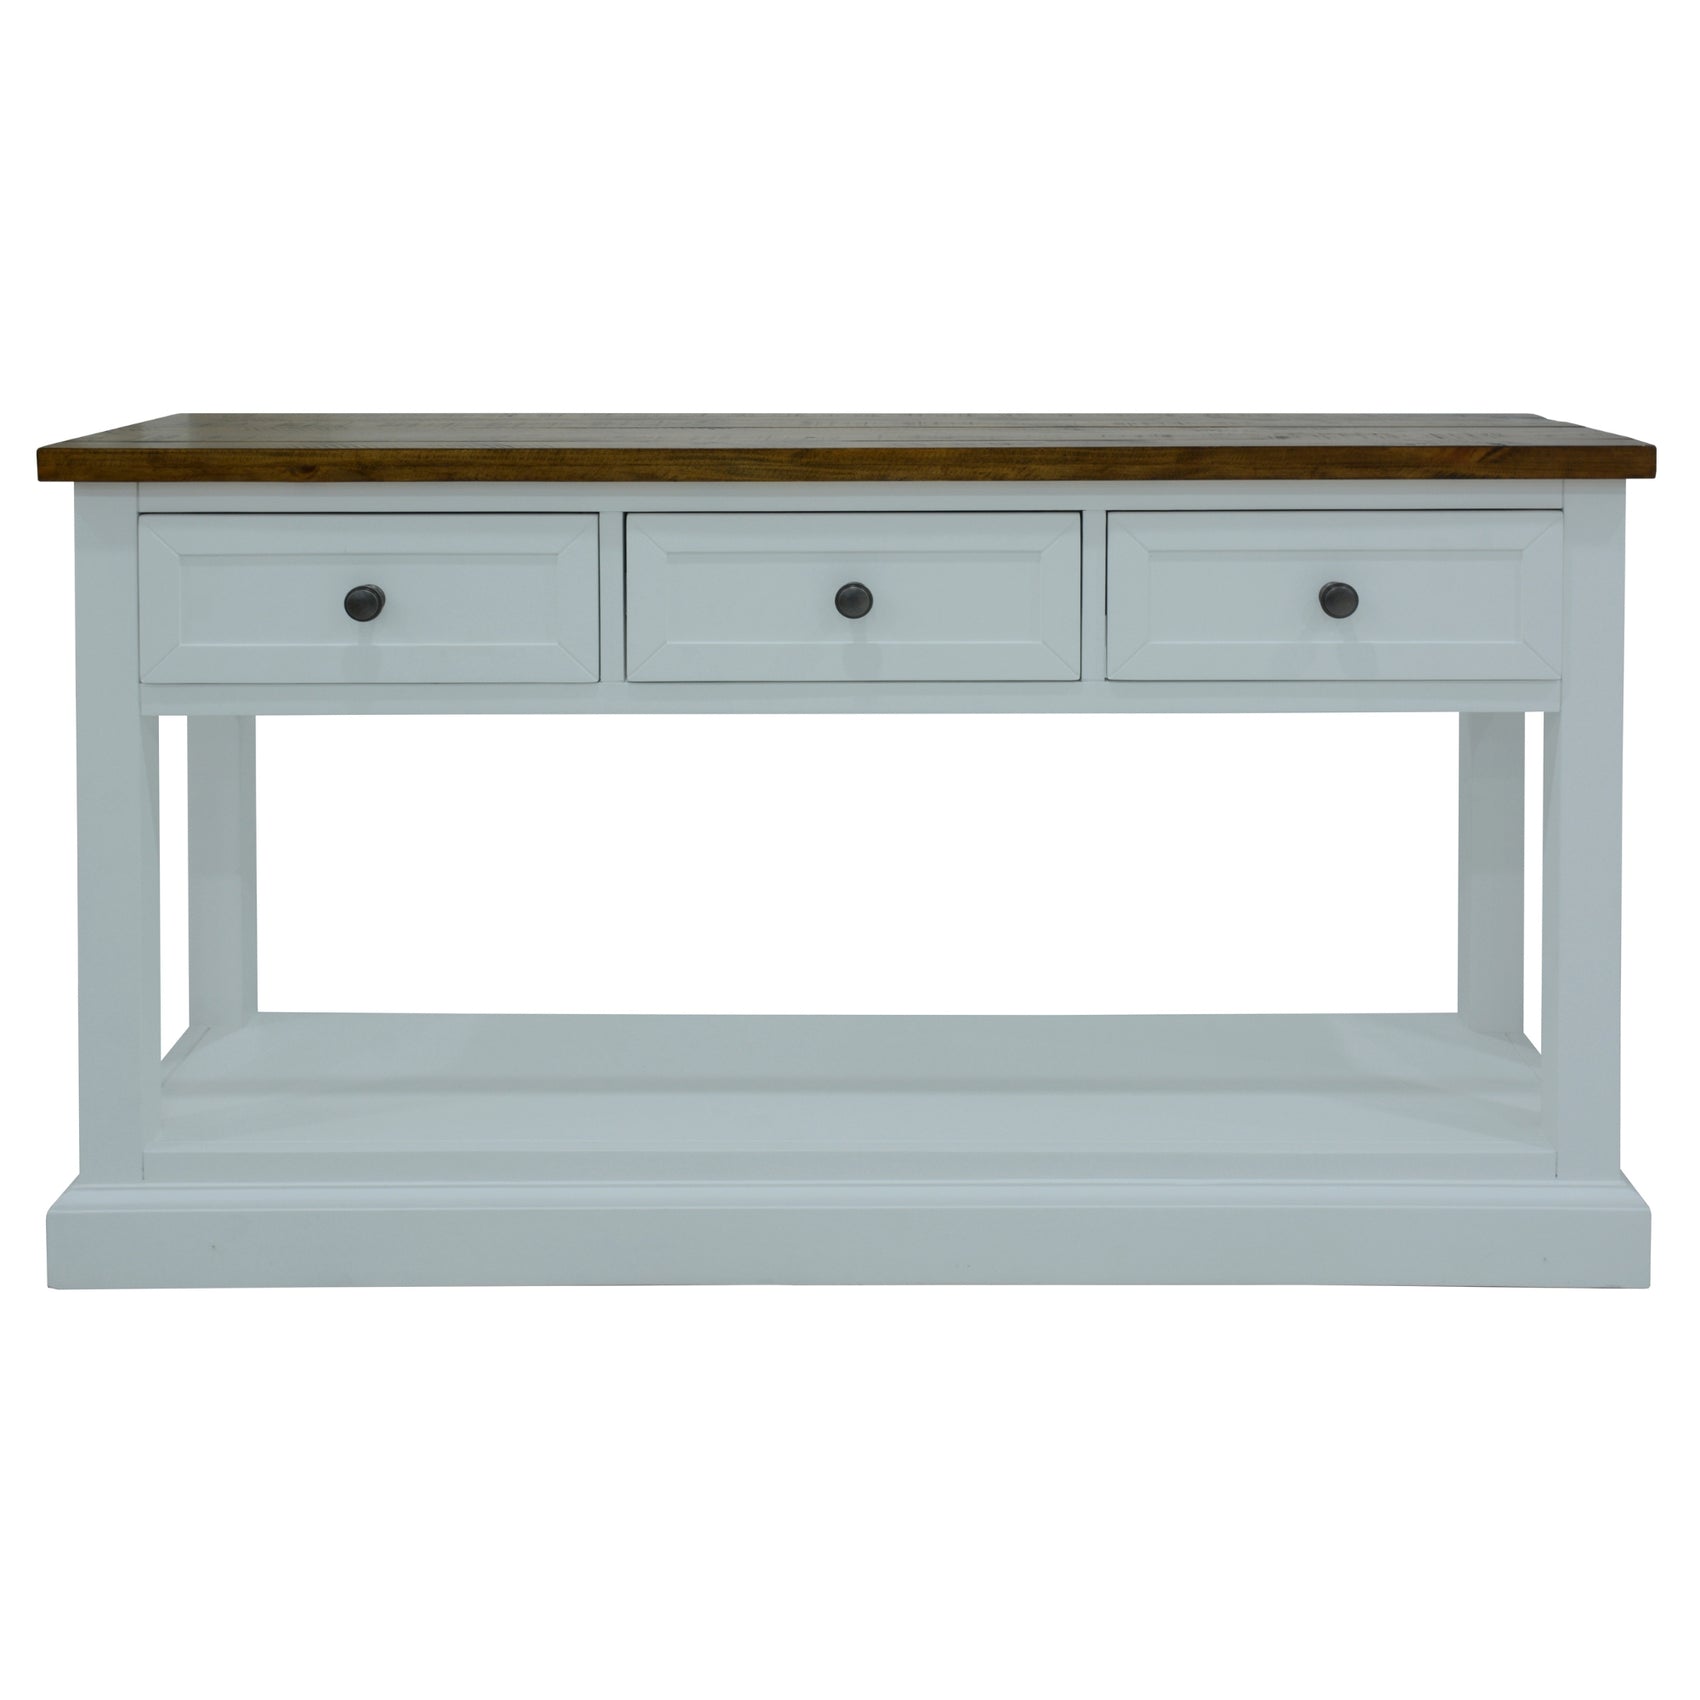 Norah Console Table 140cm32 Drawer Solid Acacia Timber Wood